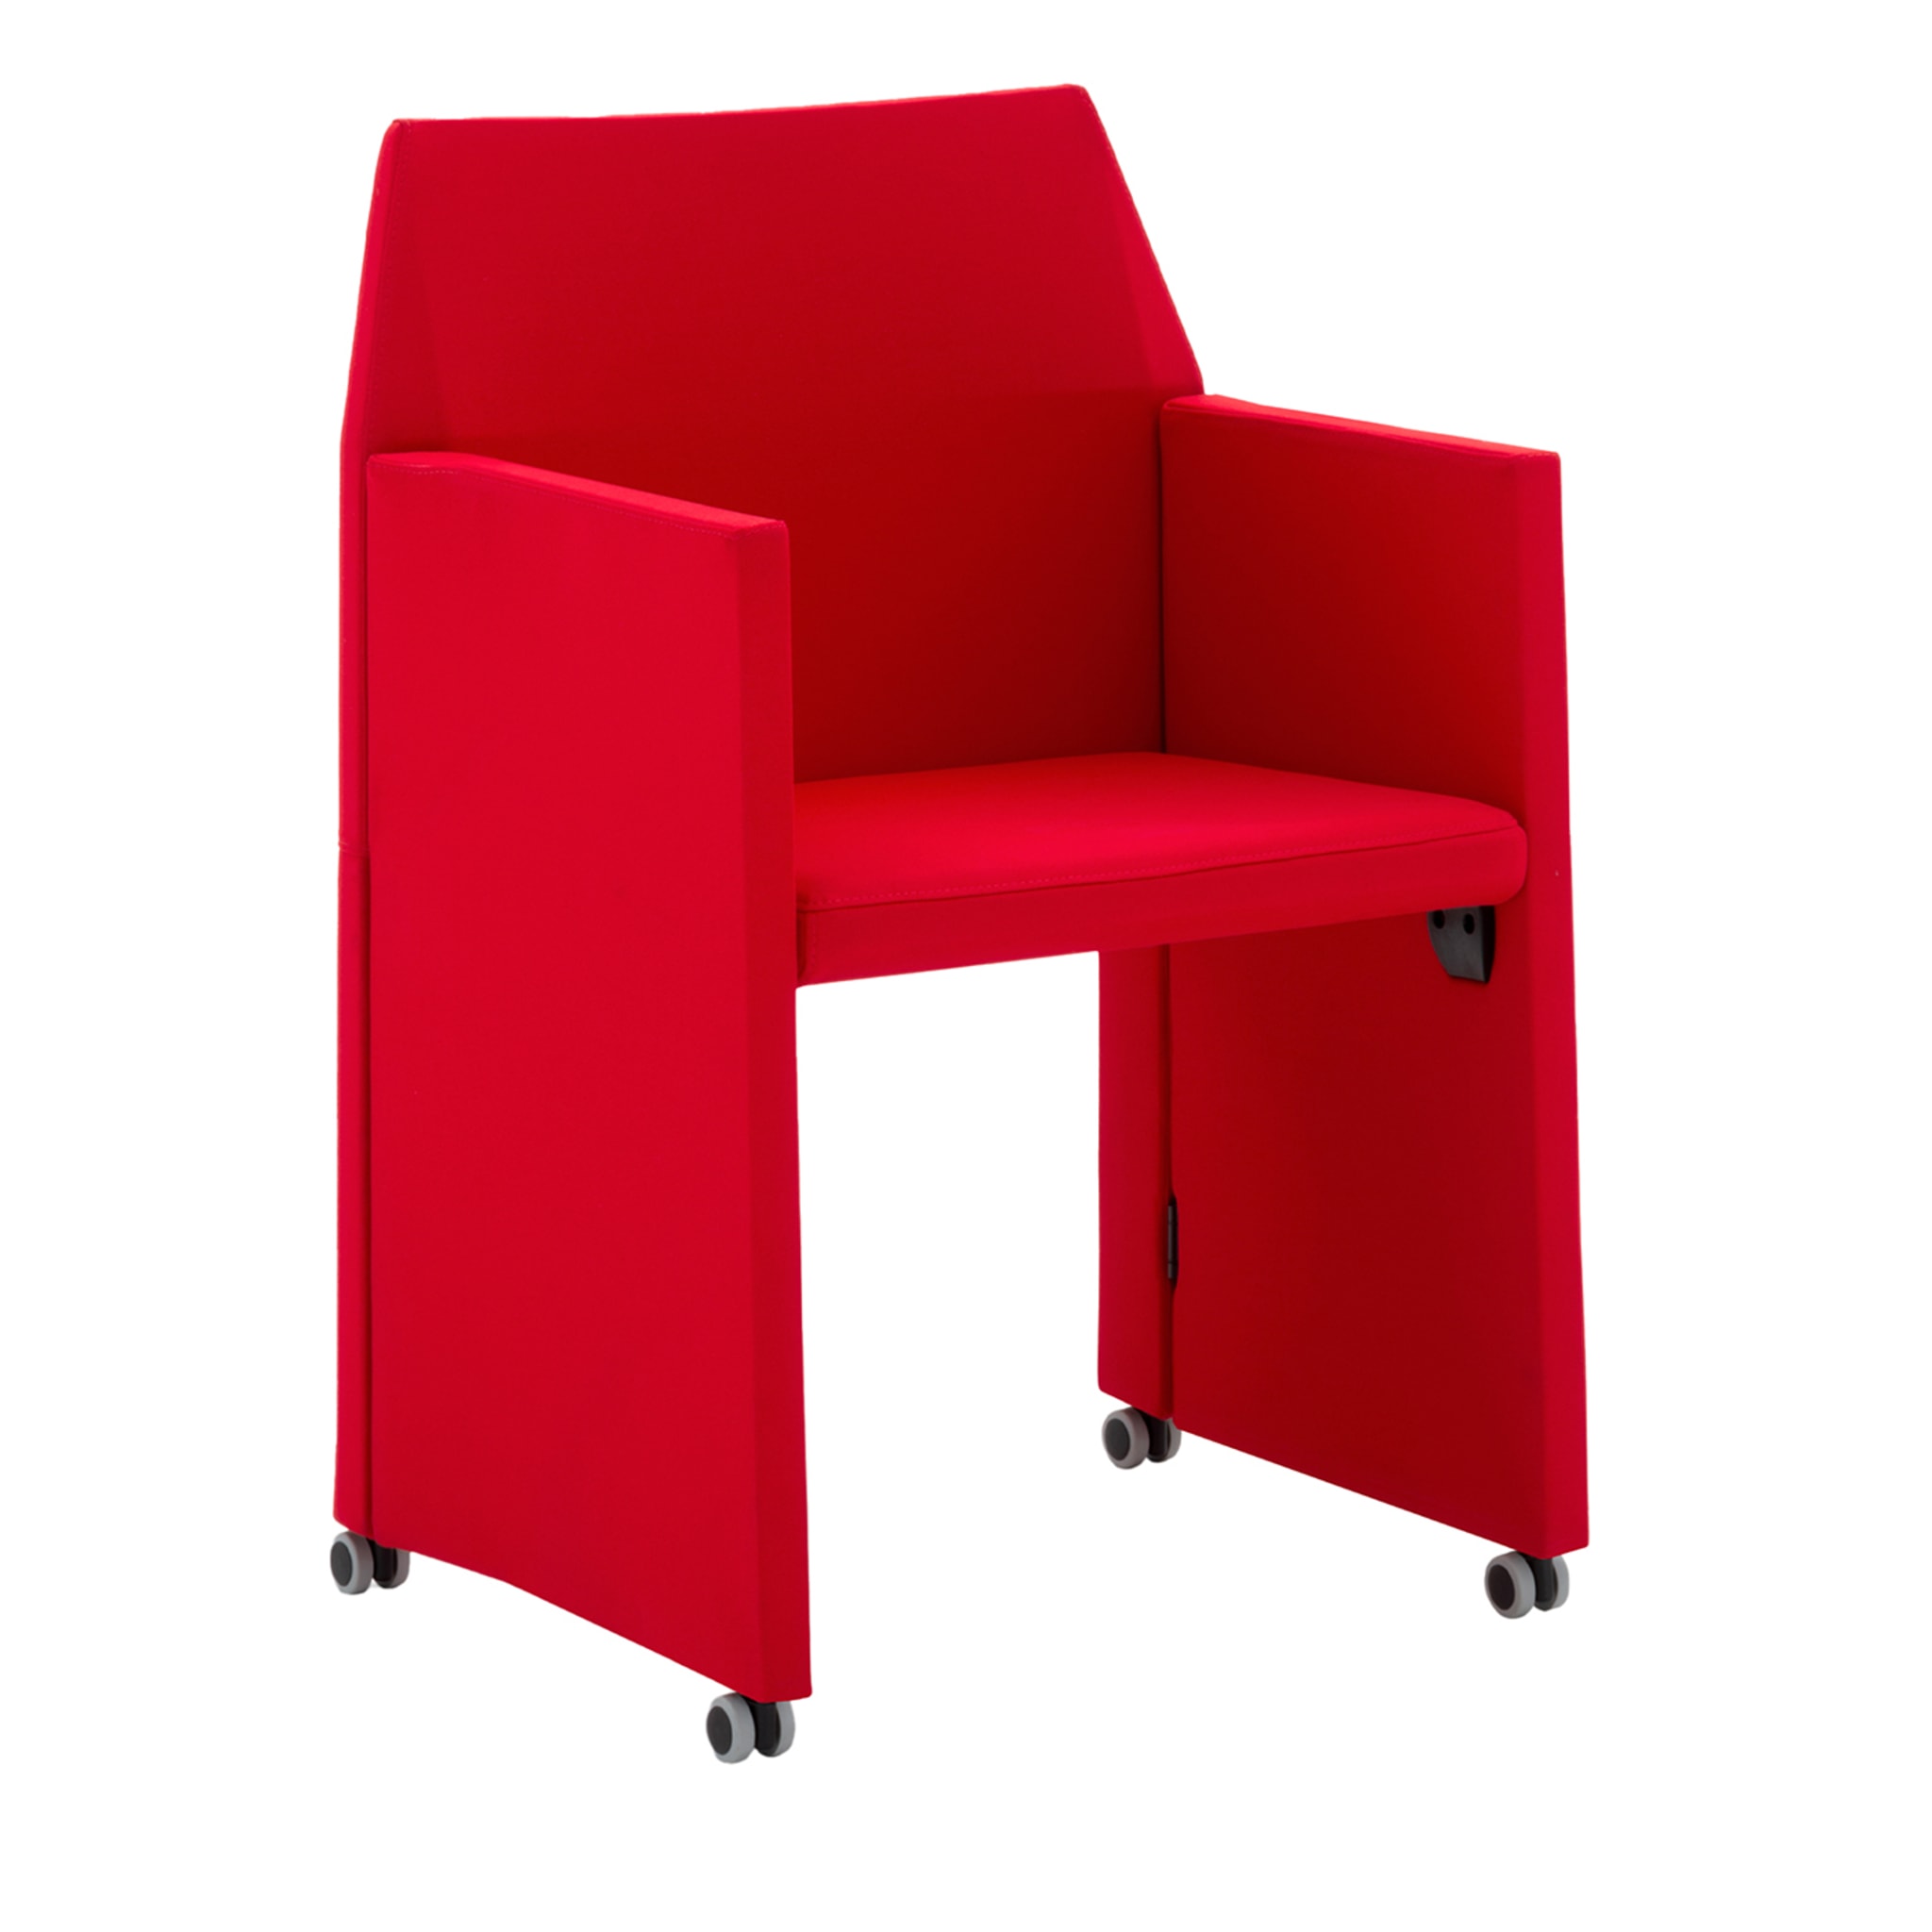 SYRIO RED CHAIR - Main view